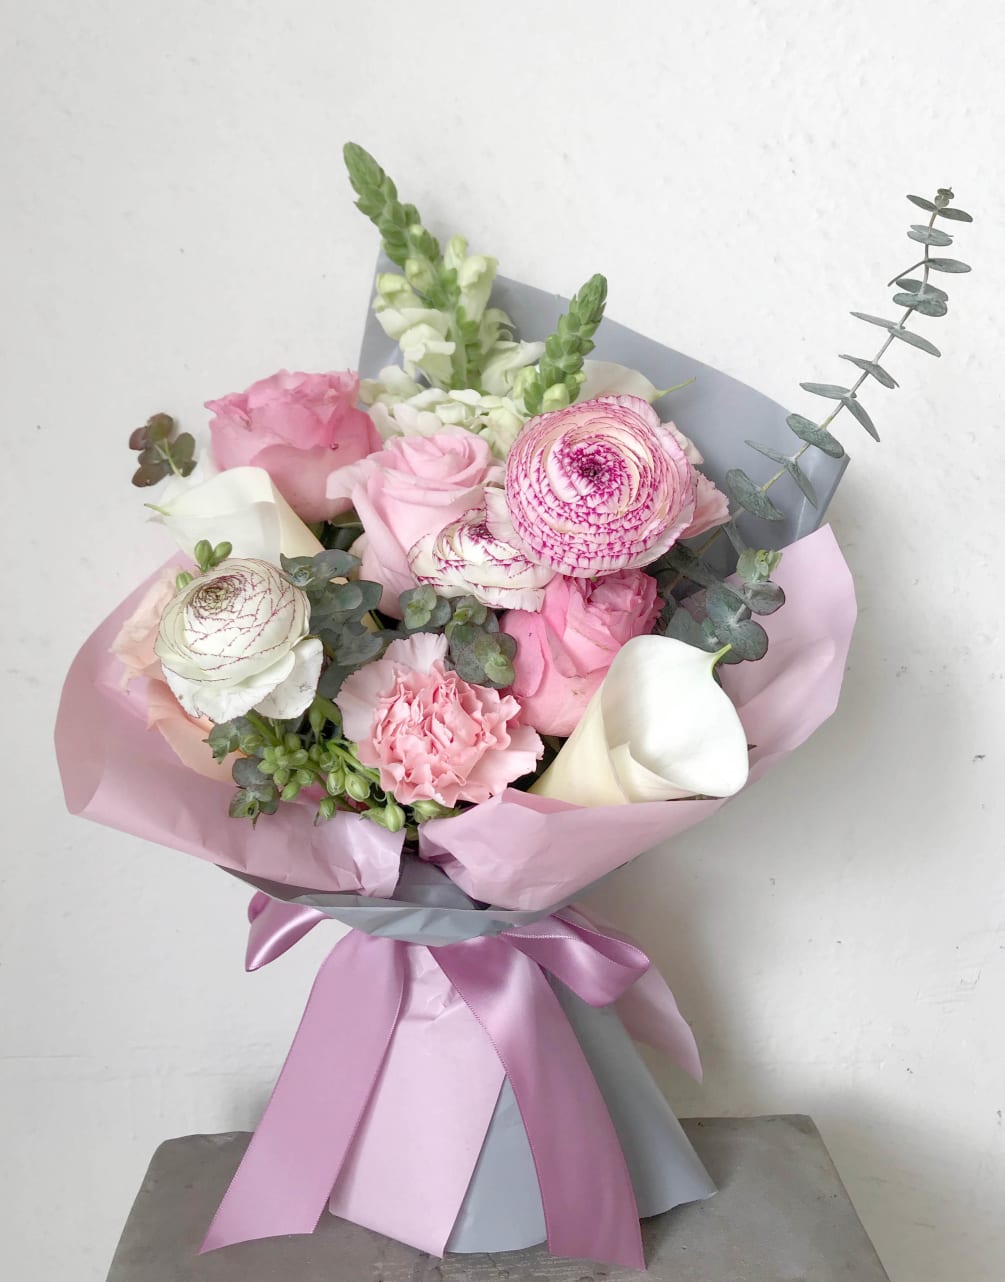 Pink and white Ranunculus, Pink and white Roses, white Calla Lillies, Snap